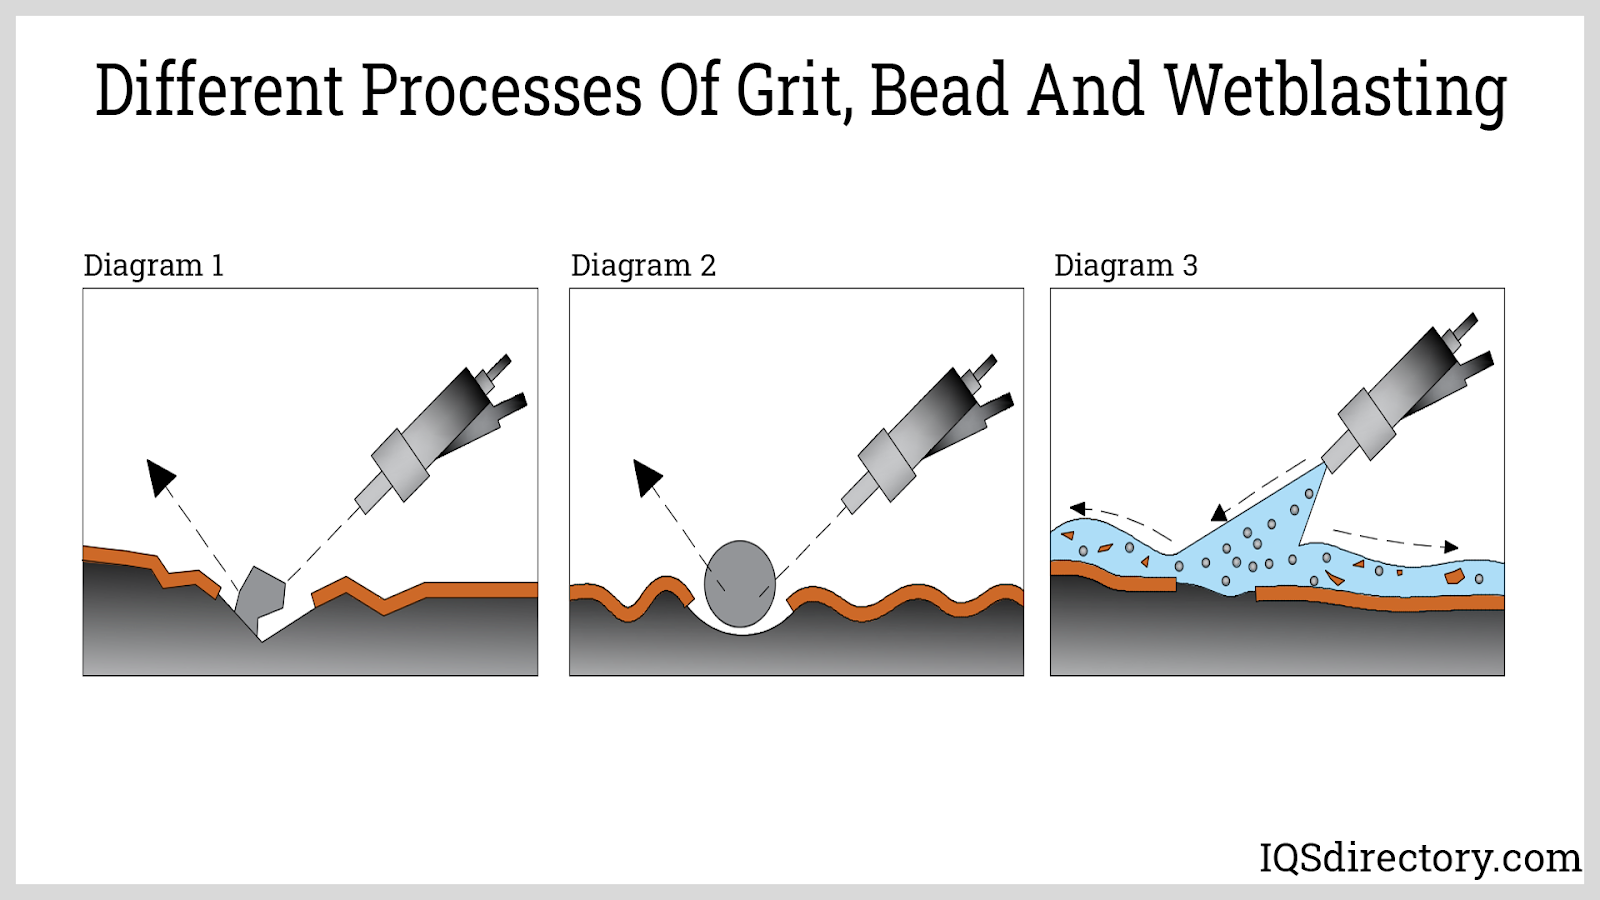 Different Processes of Grit, Bead and Wetblasting